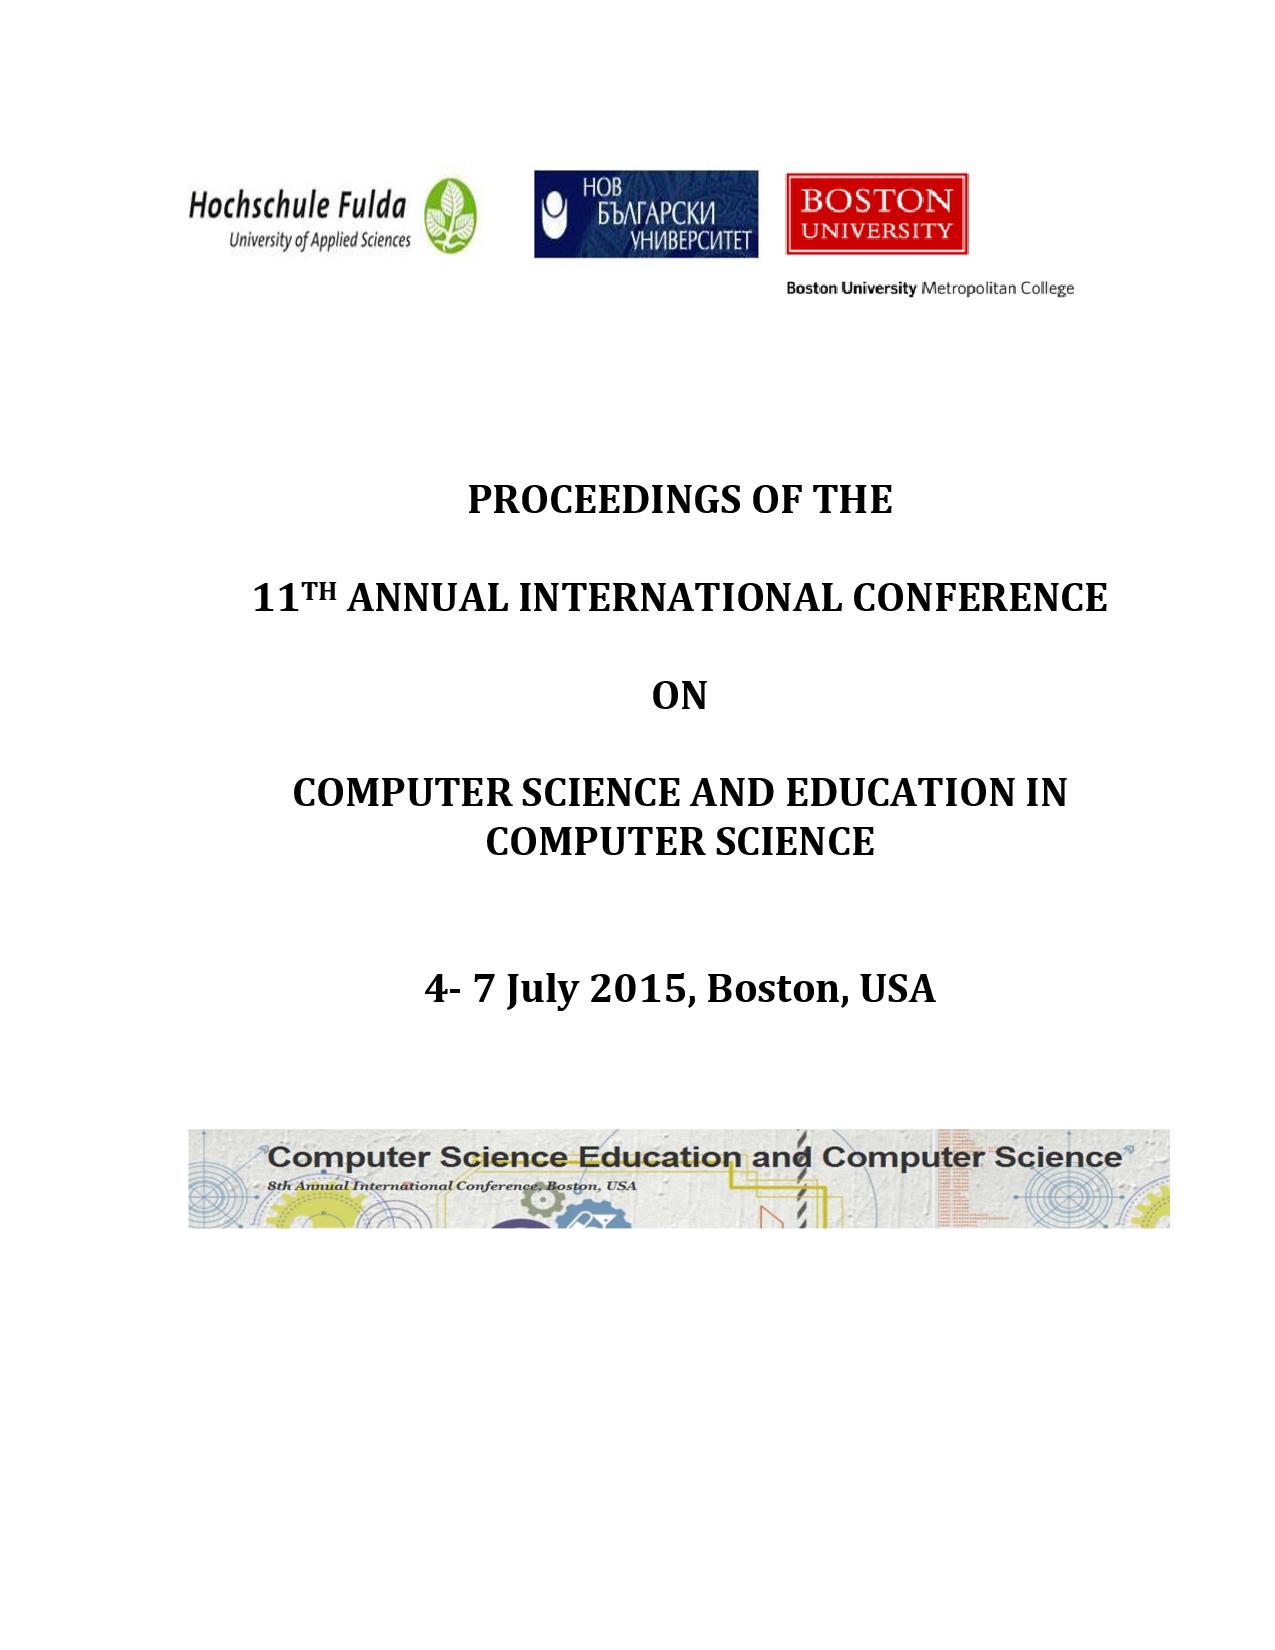 Computer Science Programs, Goals, Student Learning Outcomes and Their Assessment Cover Image